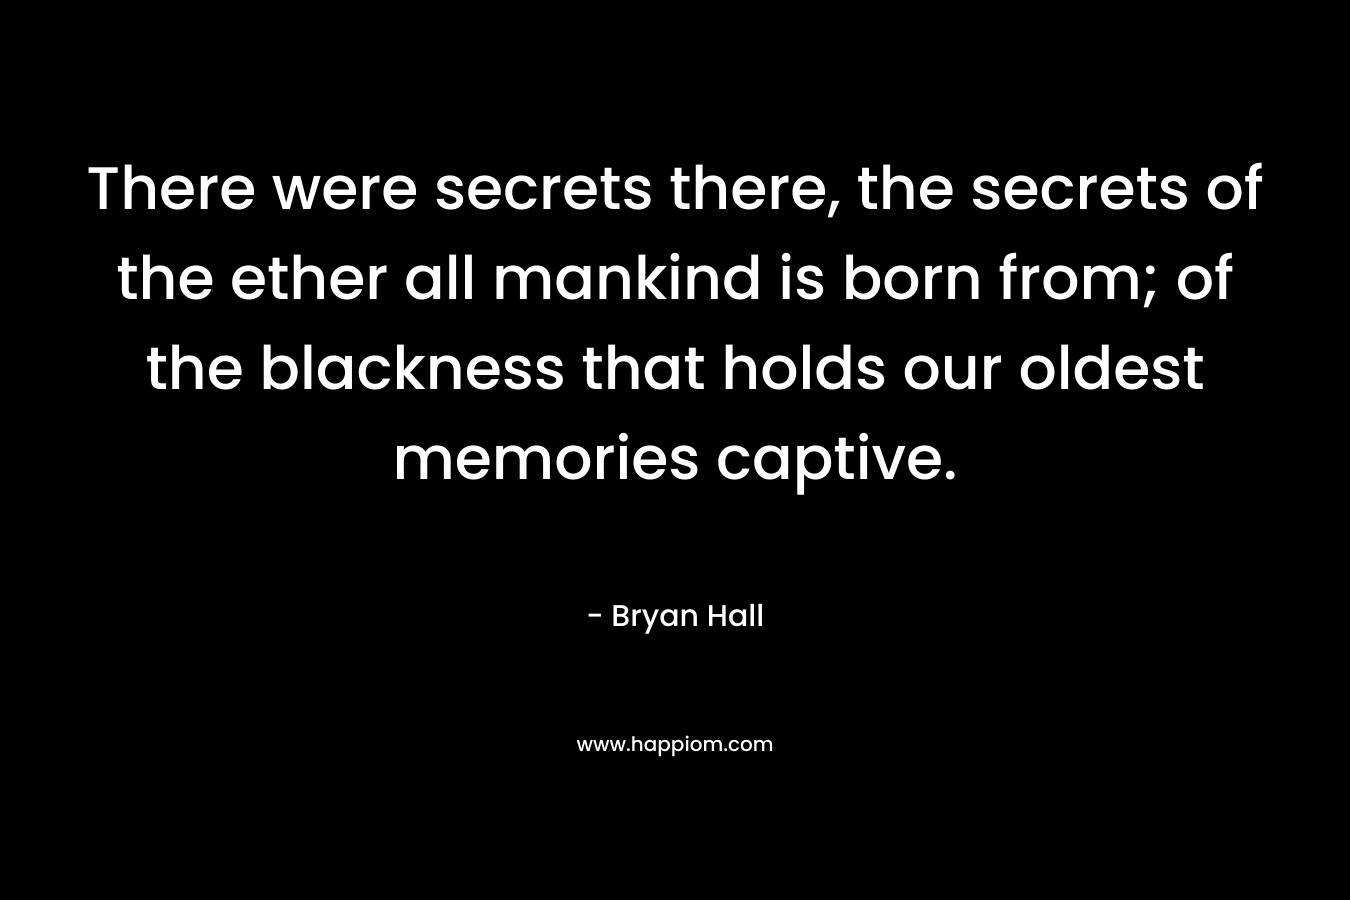 There were secrets there, the secrets of the ether all mankind is born from; of the blackness that holds our oldest memories captive.